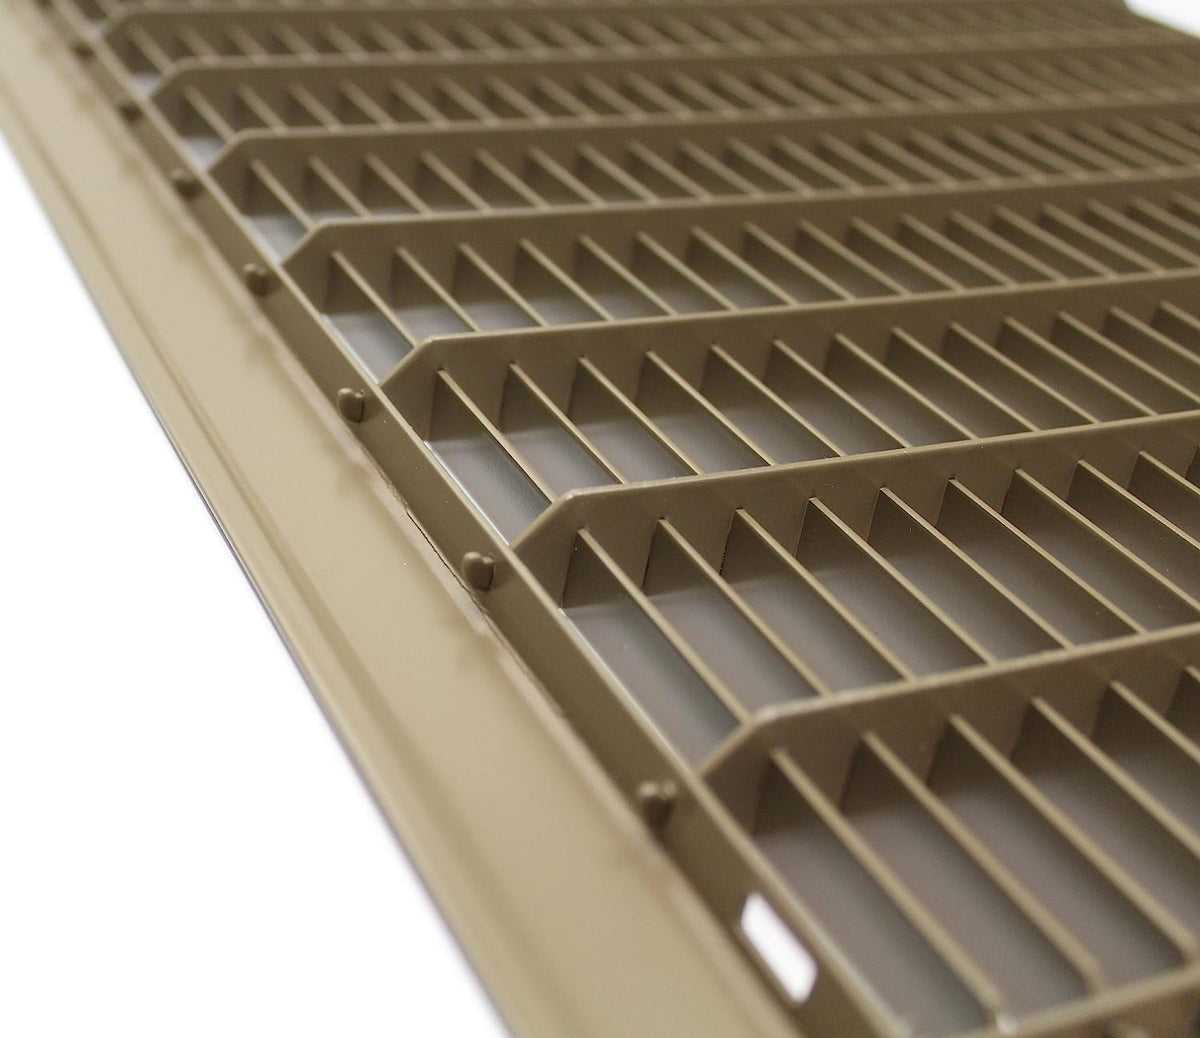 18&quot; X 24&quot; Or 24&quot; X 18&quot; Heavy Duty Floor Grille - Fixed Blades Air Grille - Brown [Outer Dimensions: 19.75 X 25.75]